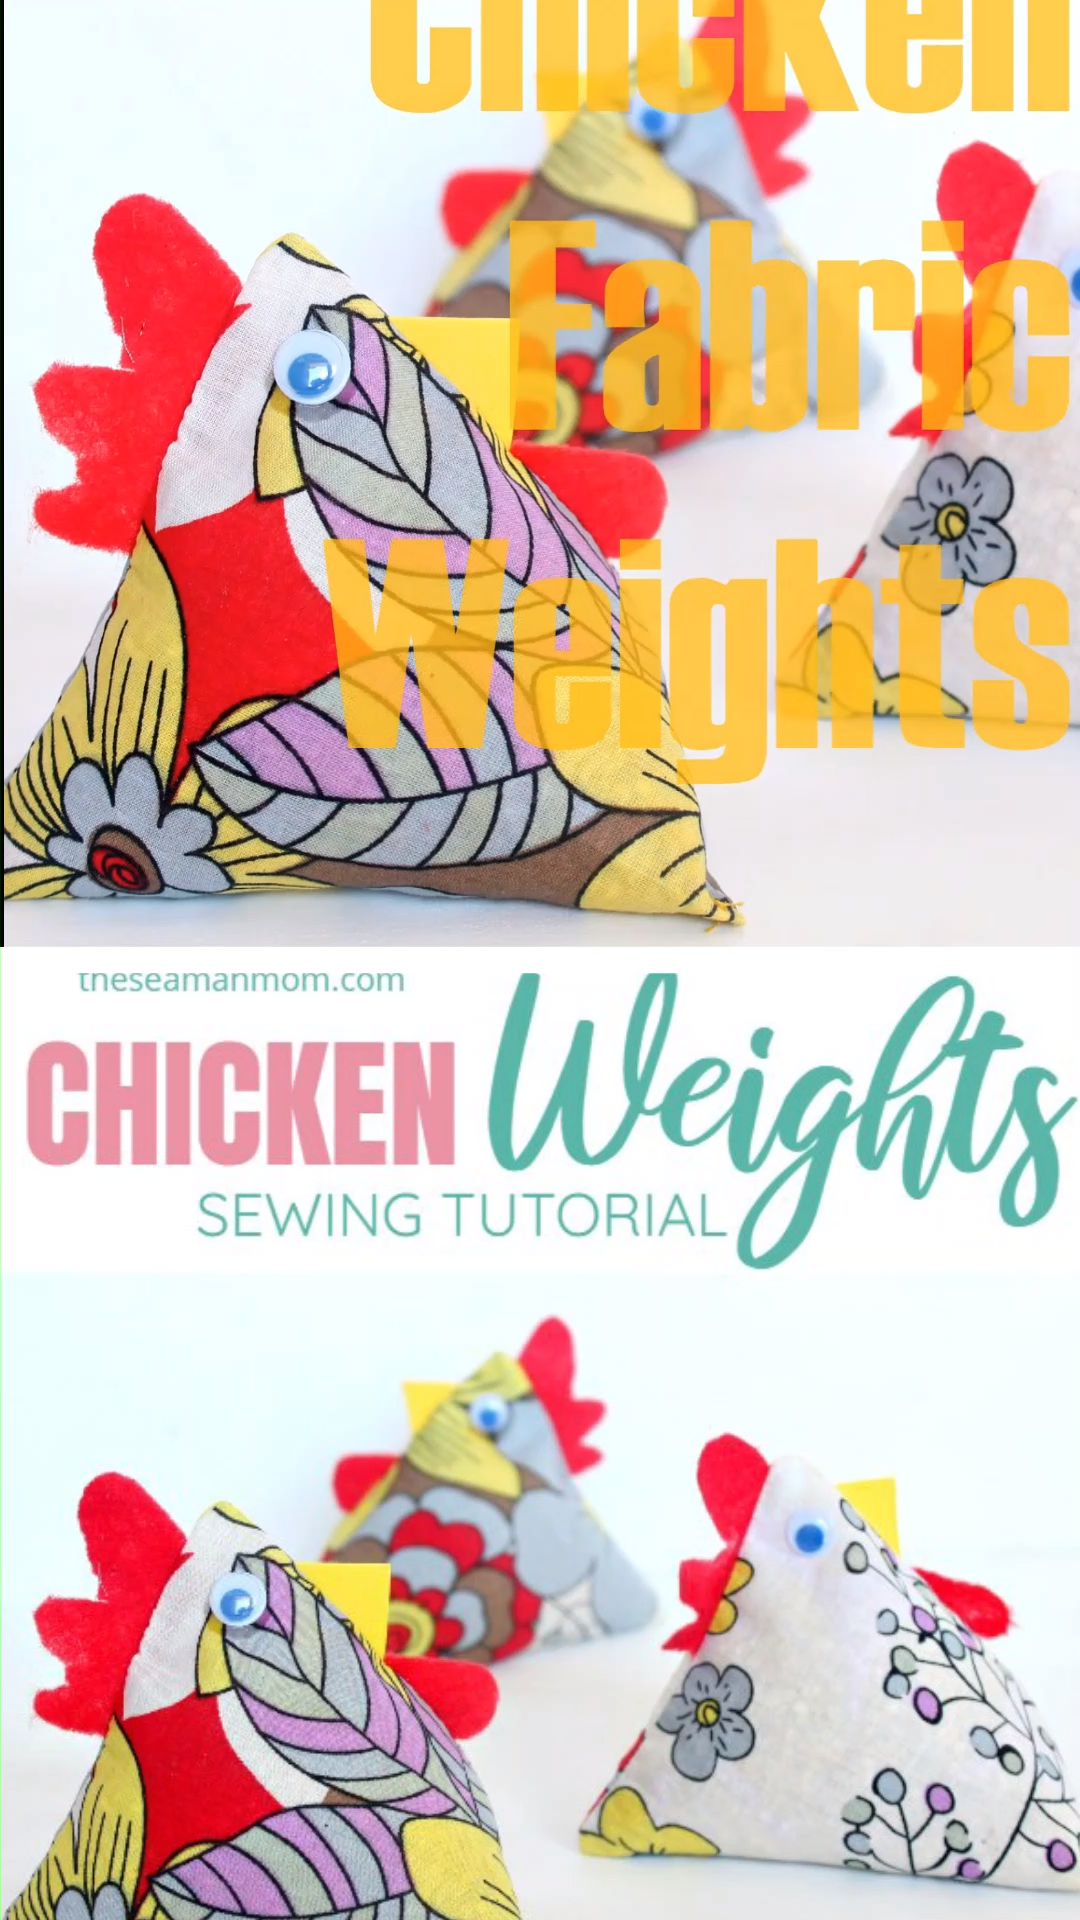 FABRIC CHICKEN WEIGHTS SEWING TUTORIAL -   18 fabric crafts For Kids to make ideas